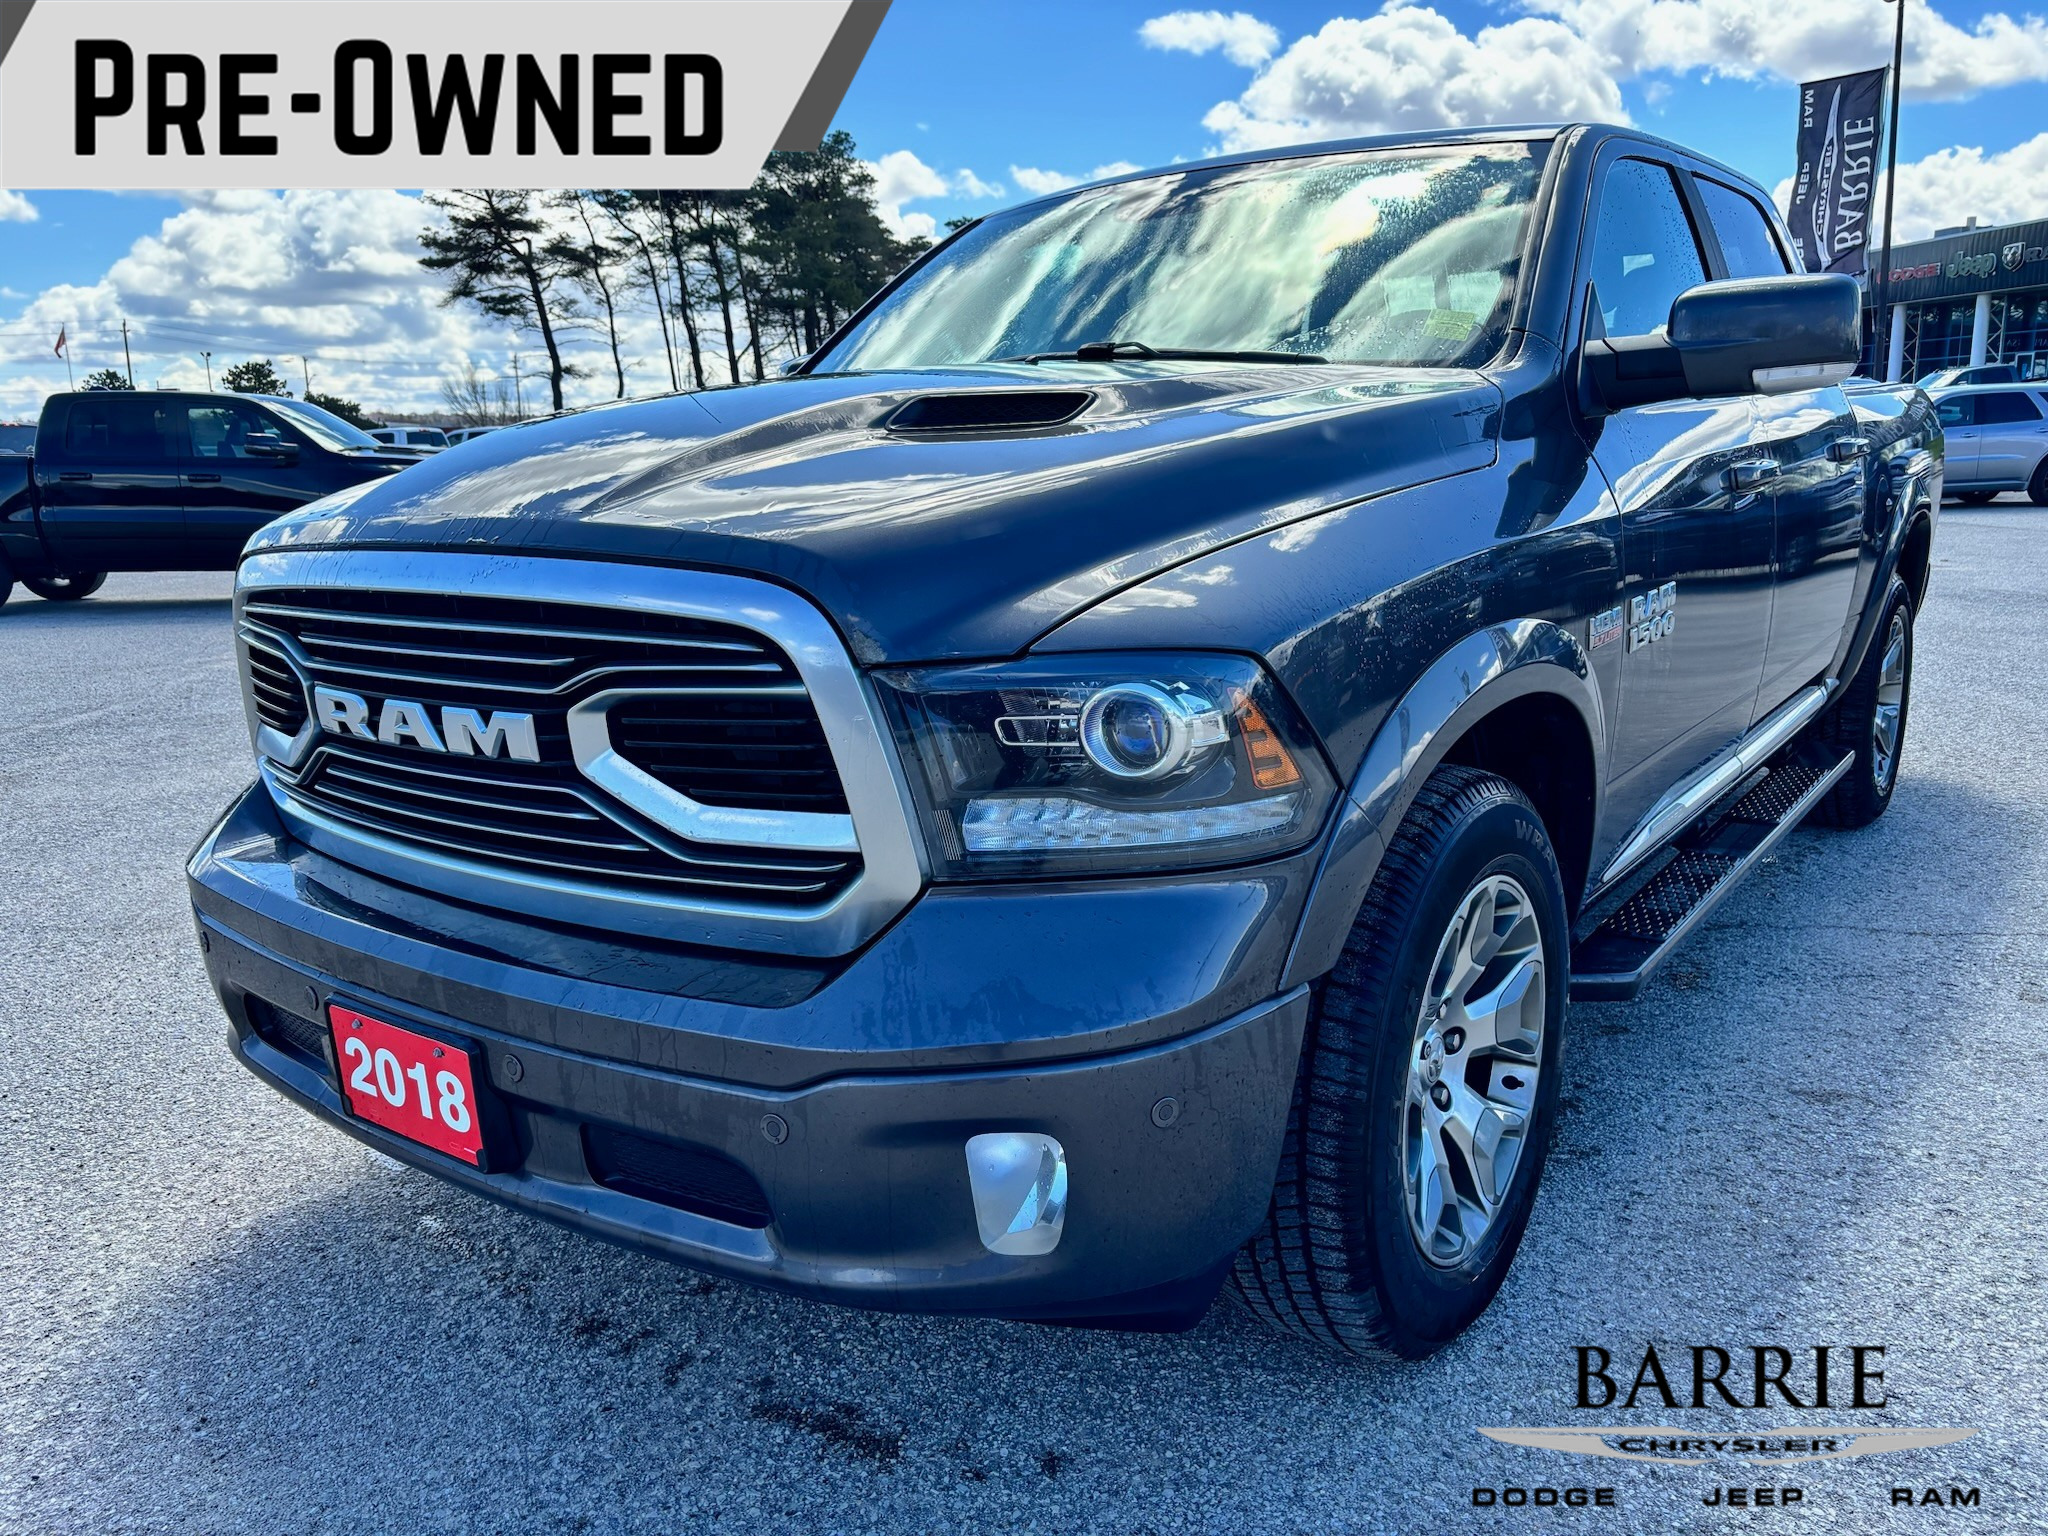 2018 Ram 1500 Longhorn LIMITED TUNGSTEN EDITION I FRONT HEATED A